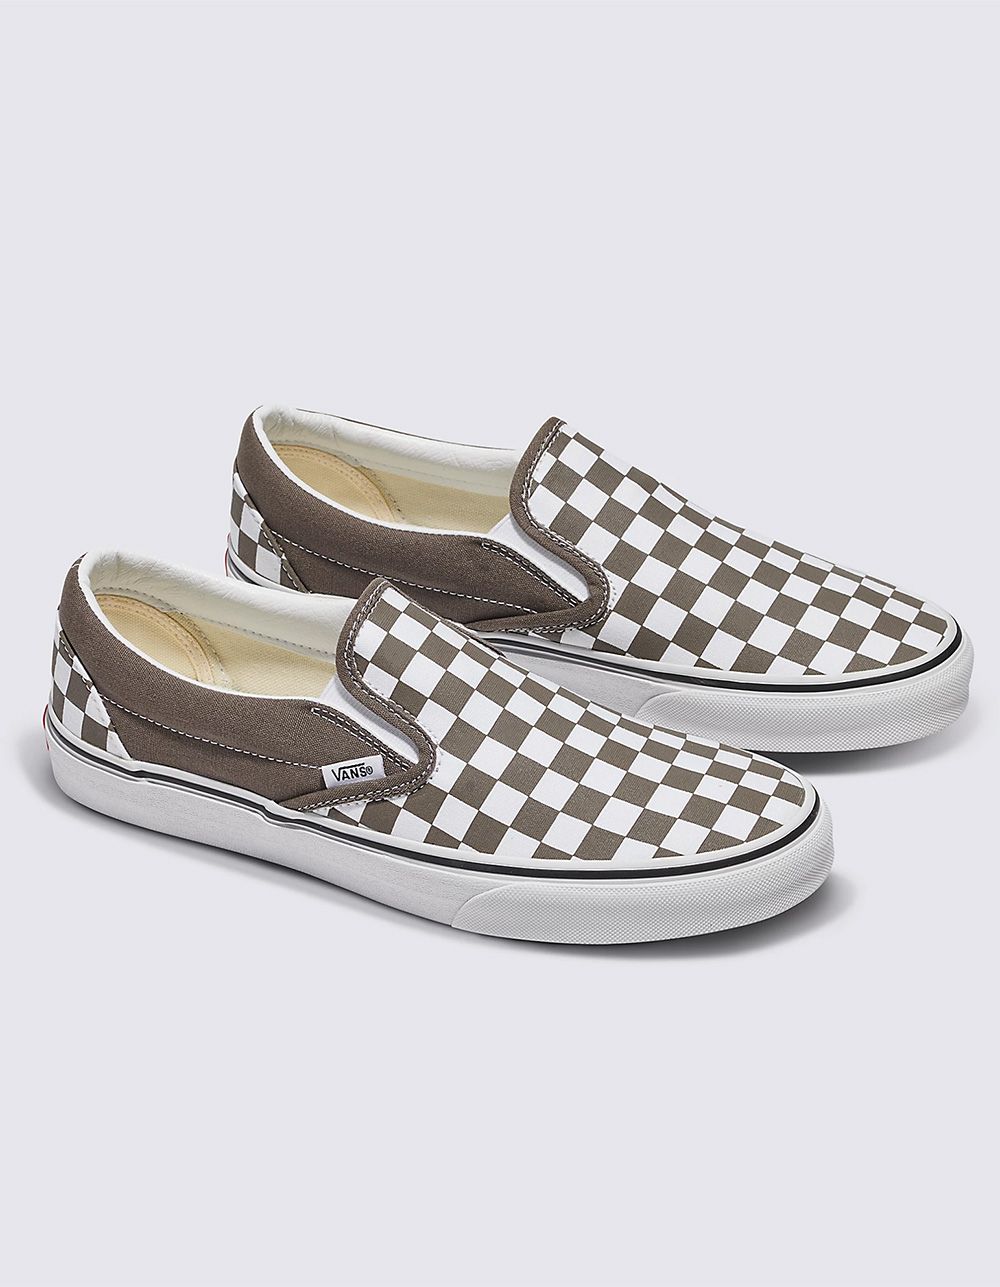 VANS Classic Slip-On Checkerboard Shoes | Tillys